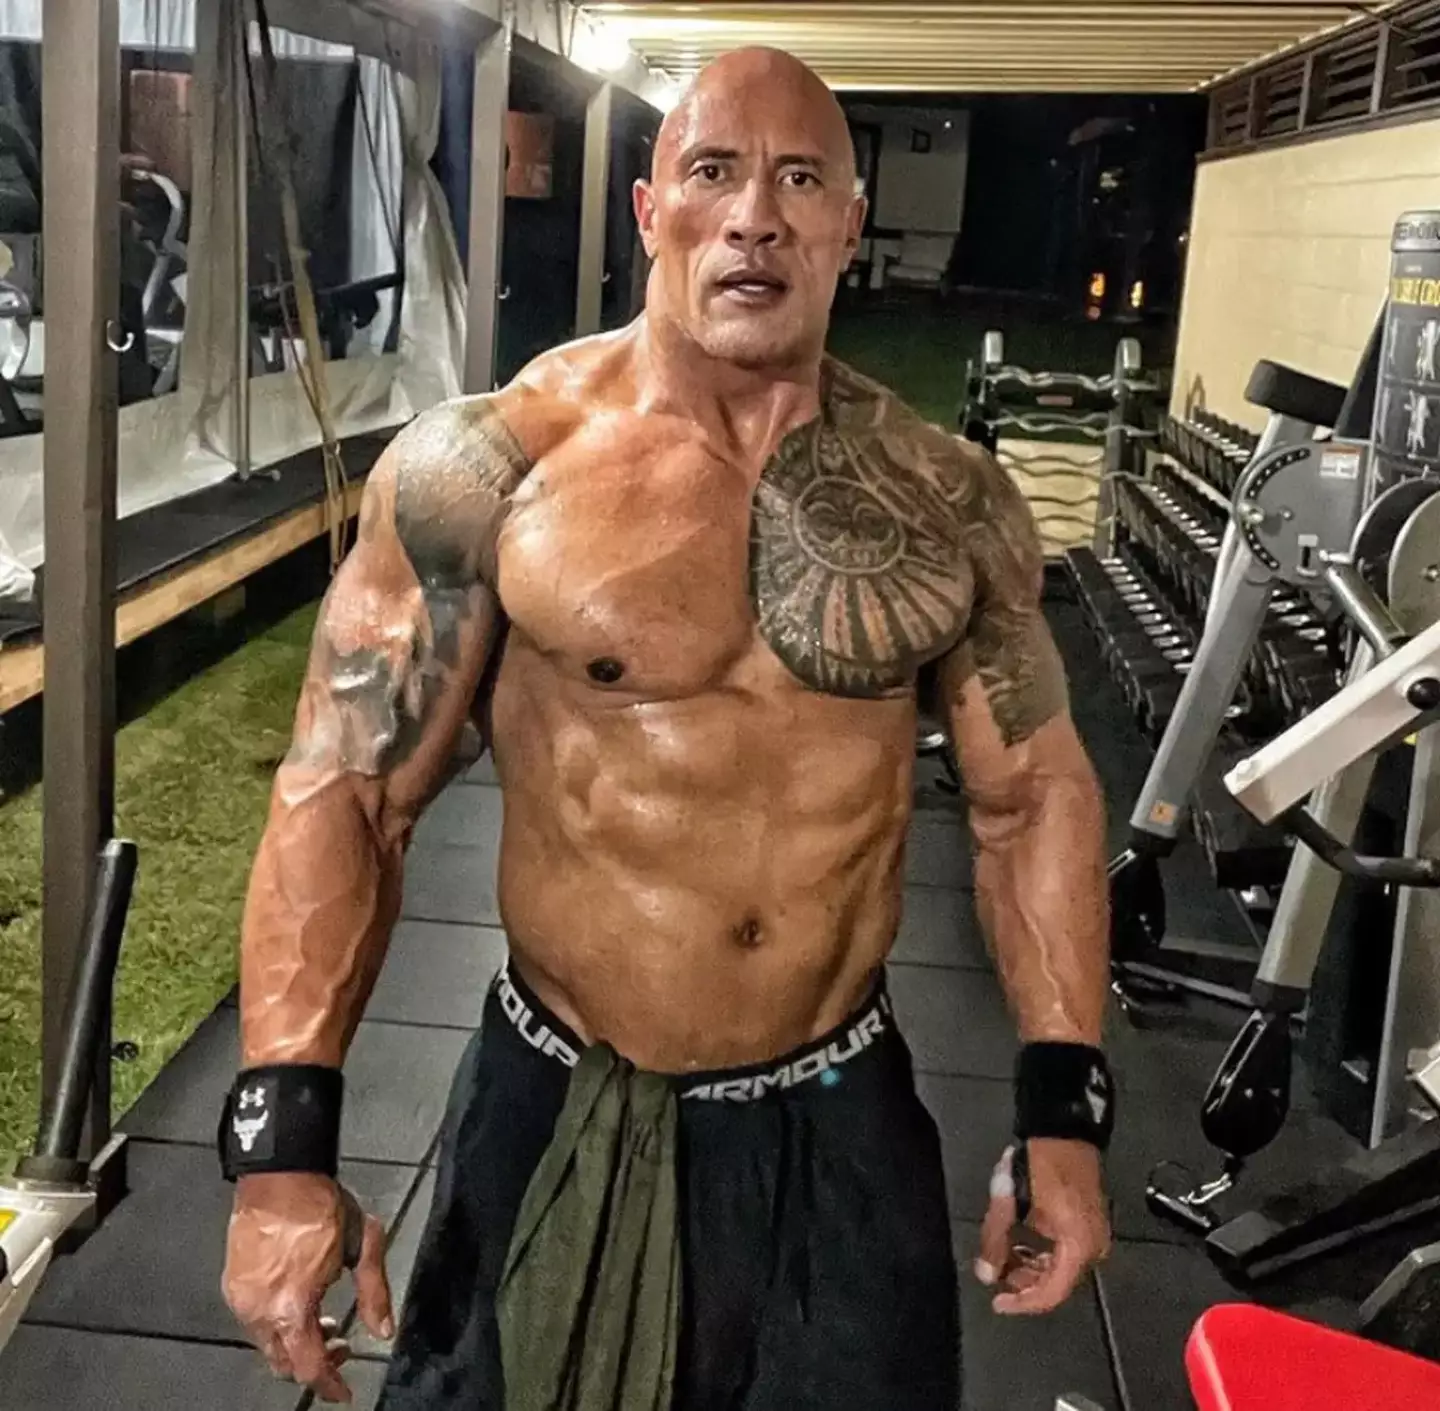 The internet is wondering why The Rock doesn't have a six pack.